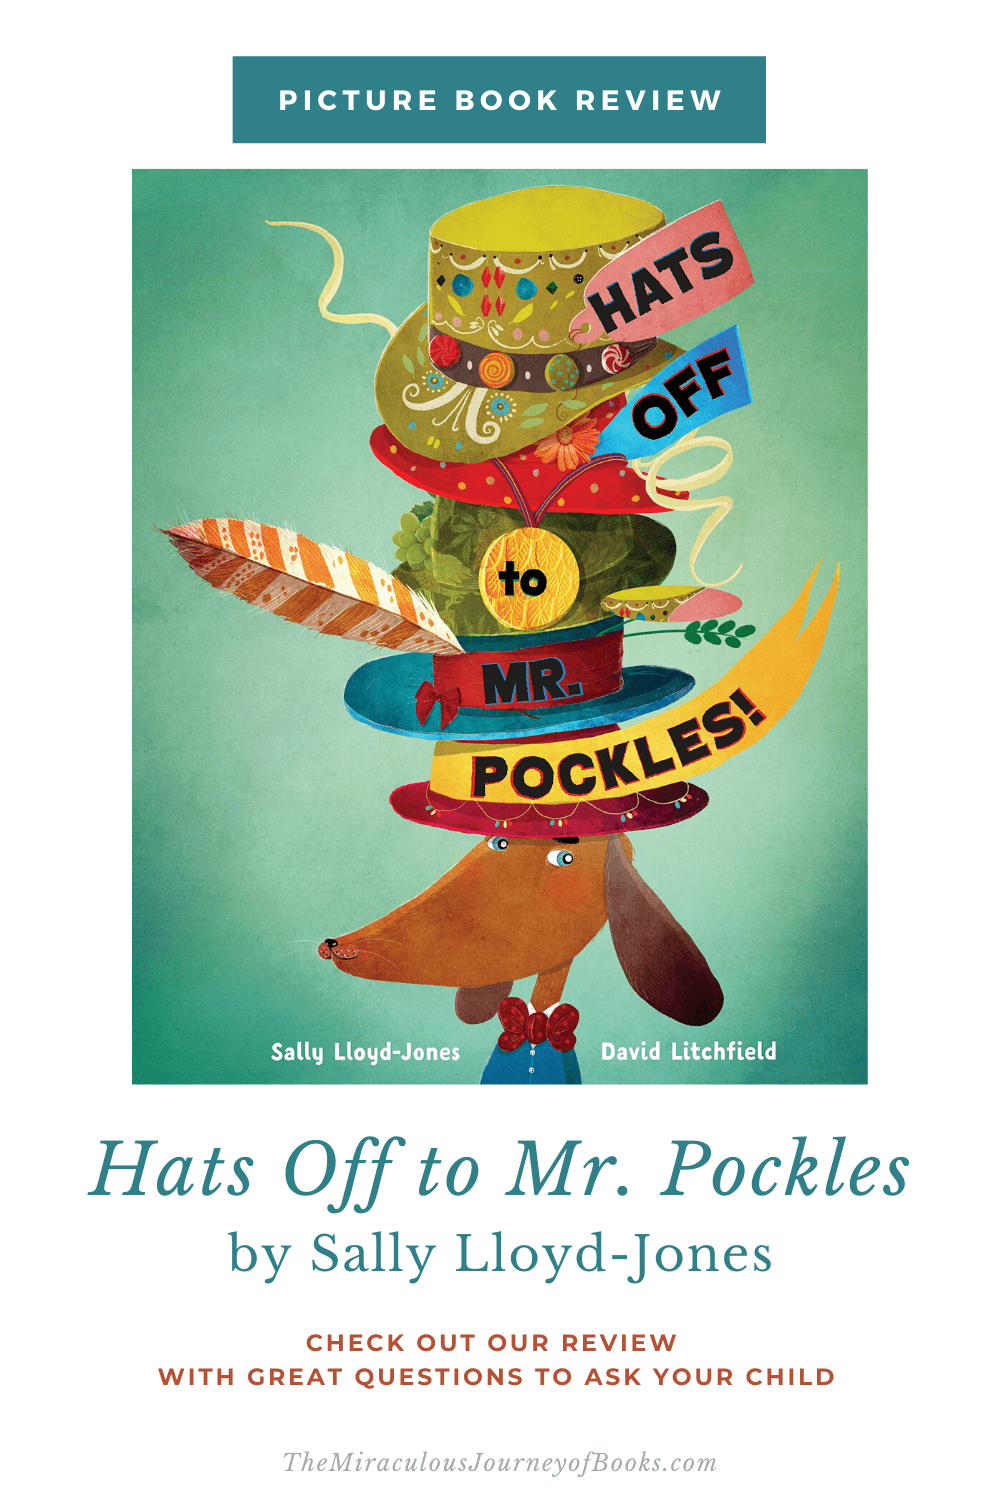 Hats Off to Mr. Pockles! Book Review